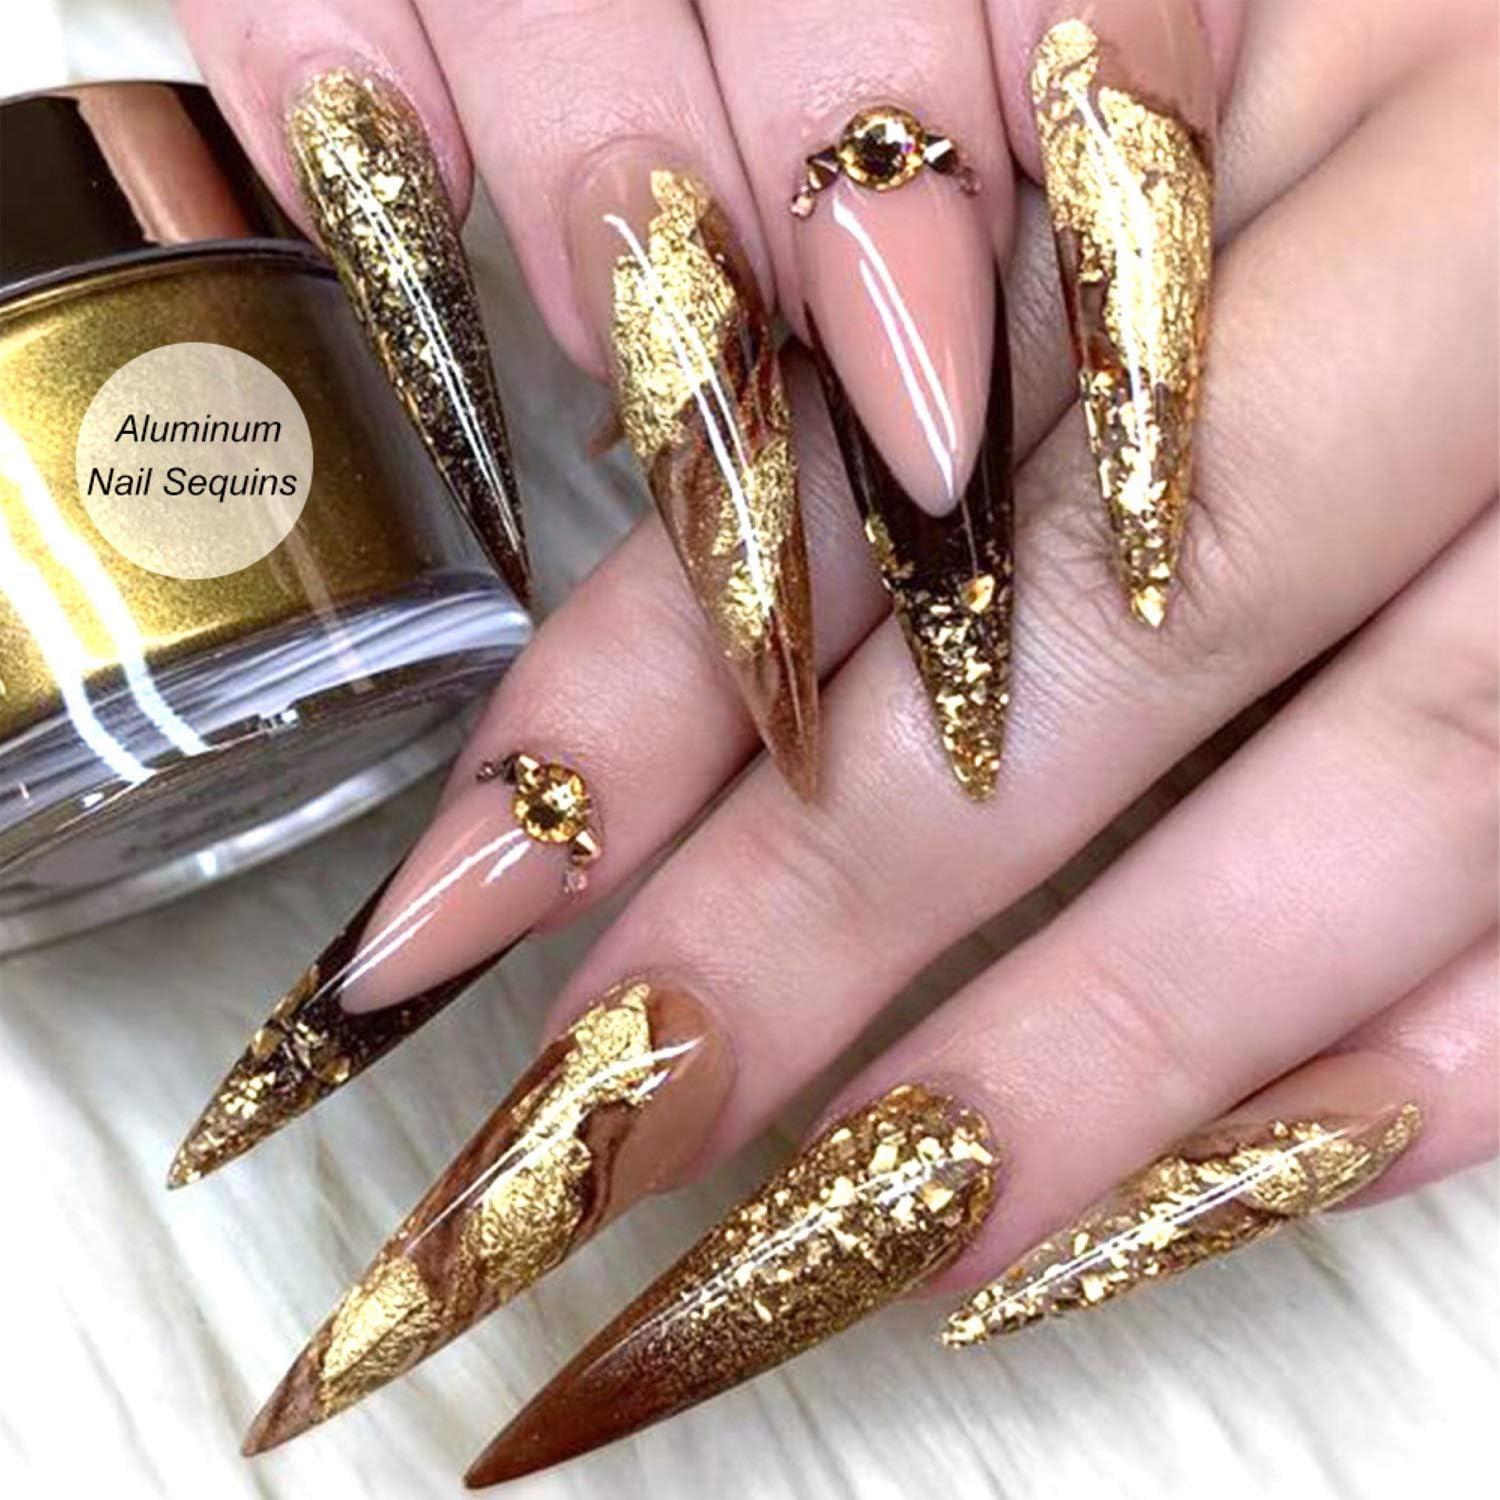 Gold Foil Nail Art Set Nail Art Decals Stickers Fragments Nail Foil Art Nail  Charms DIY Manicure Nails Design Decal Decoration Gold Silver Leaf Flakes  12 Grids/Set